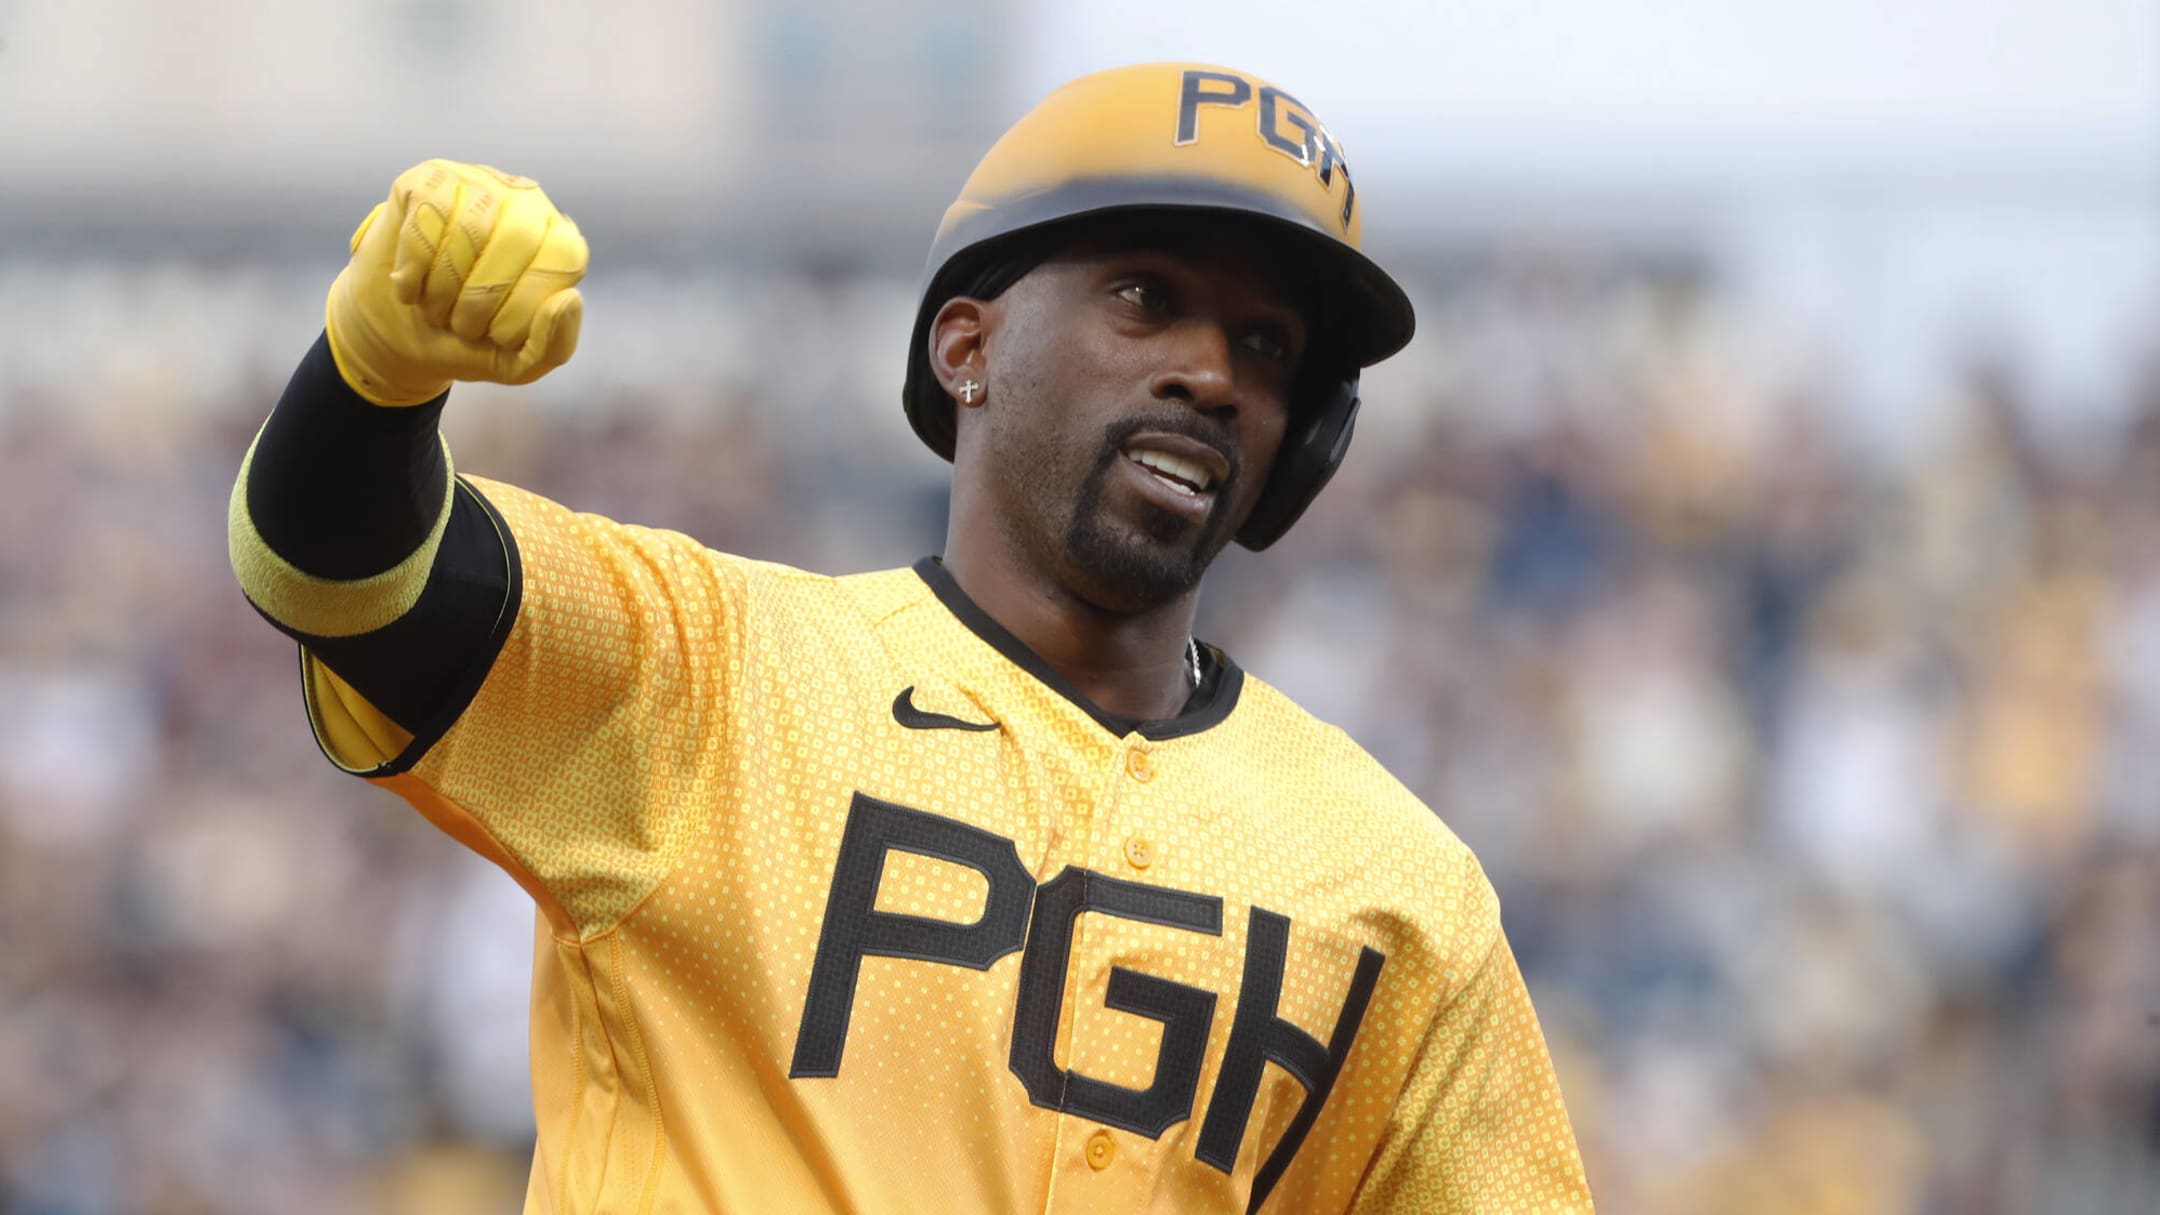 Andrew McCutchen's fabulous furry convention feats continue in Pirates'  Friday night win